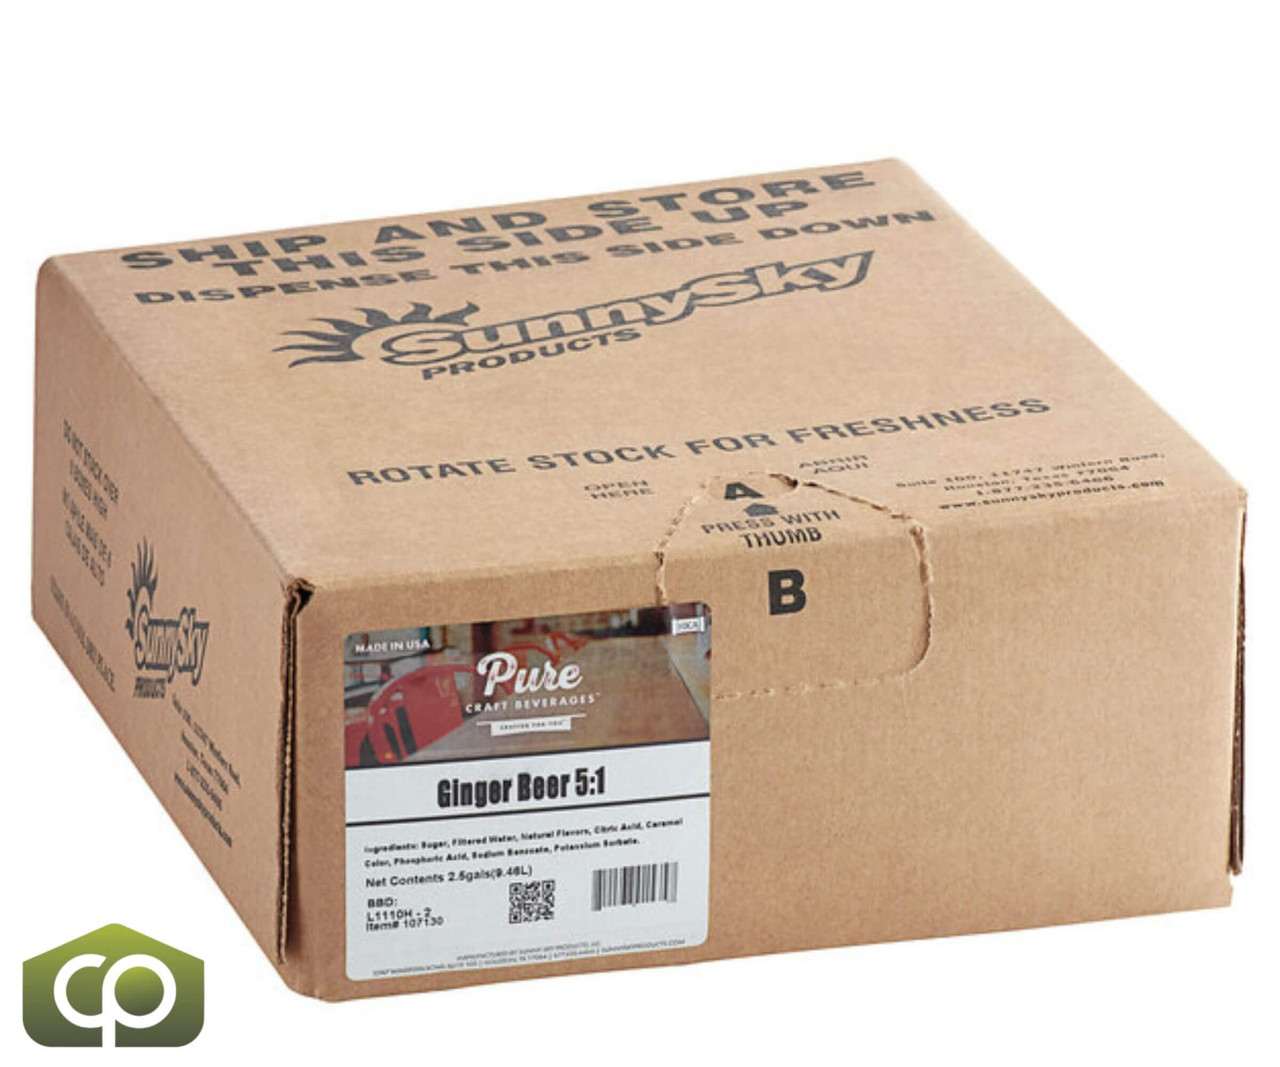 Pure Craft Beverages Refreshing Ginger Beer Syrup 2.5 Gallon Bag in Box - Chicken Pieces